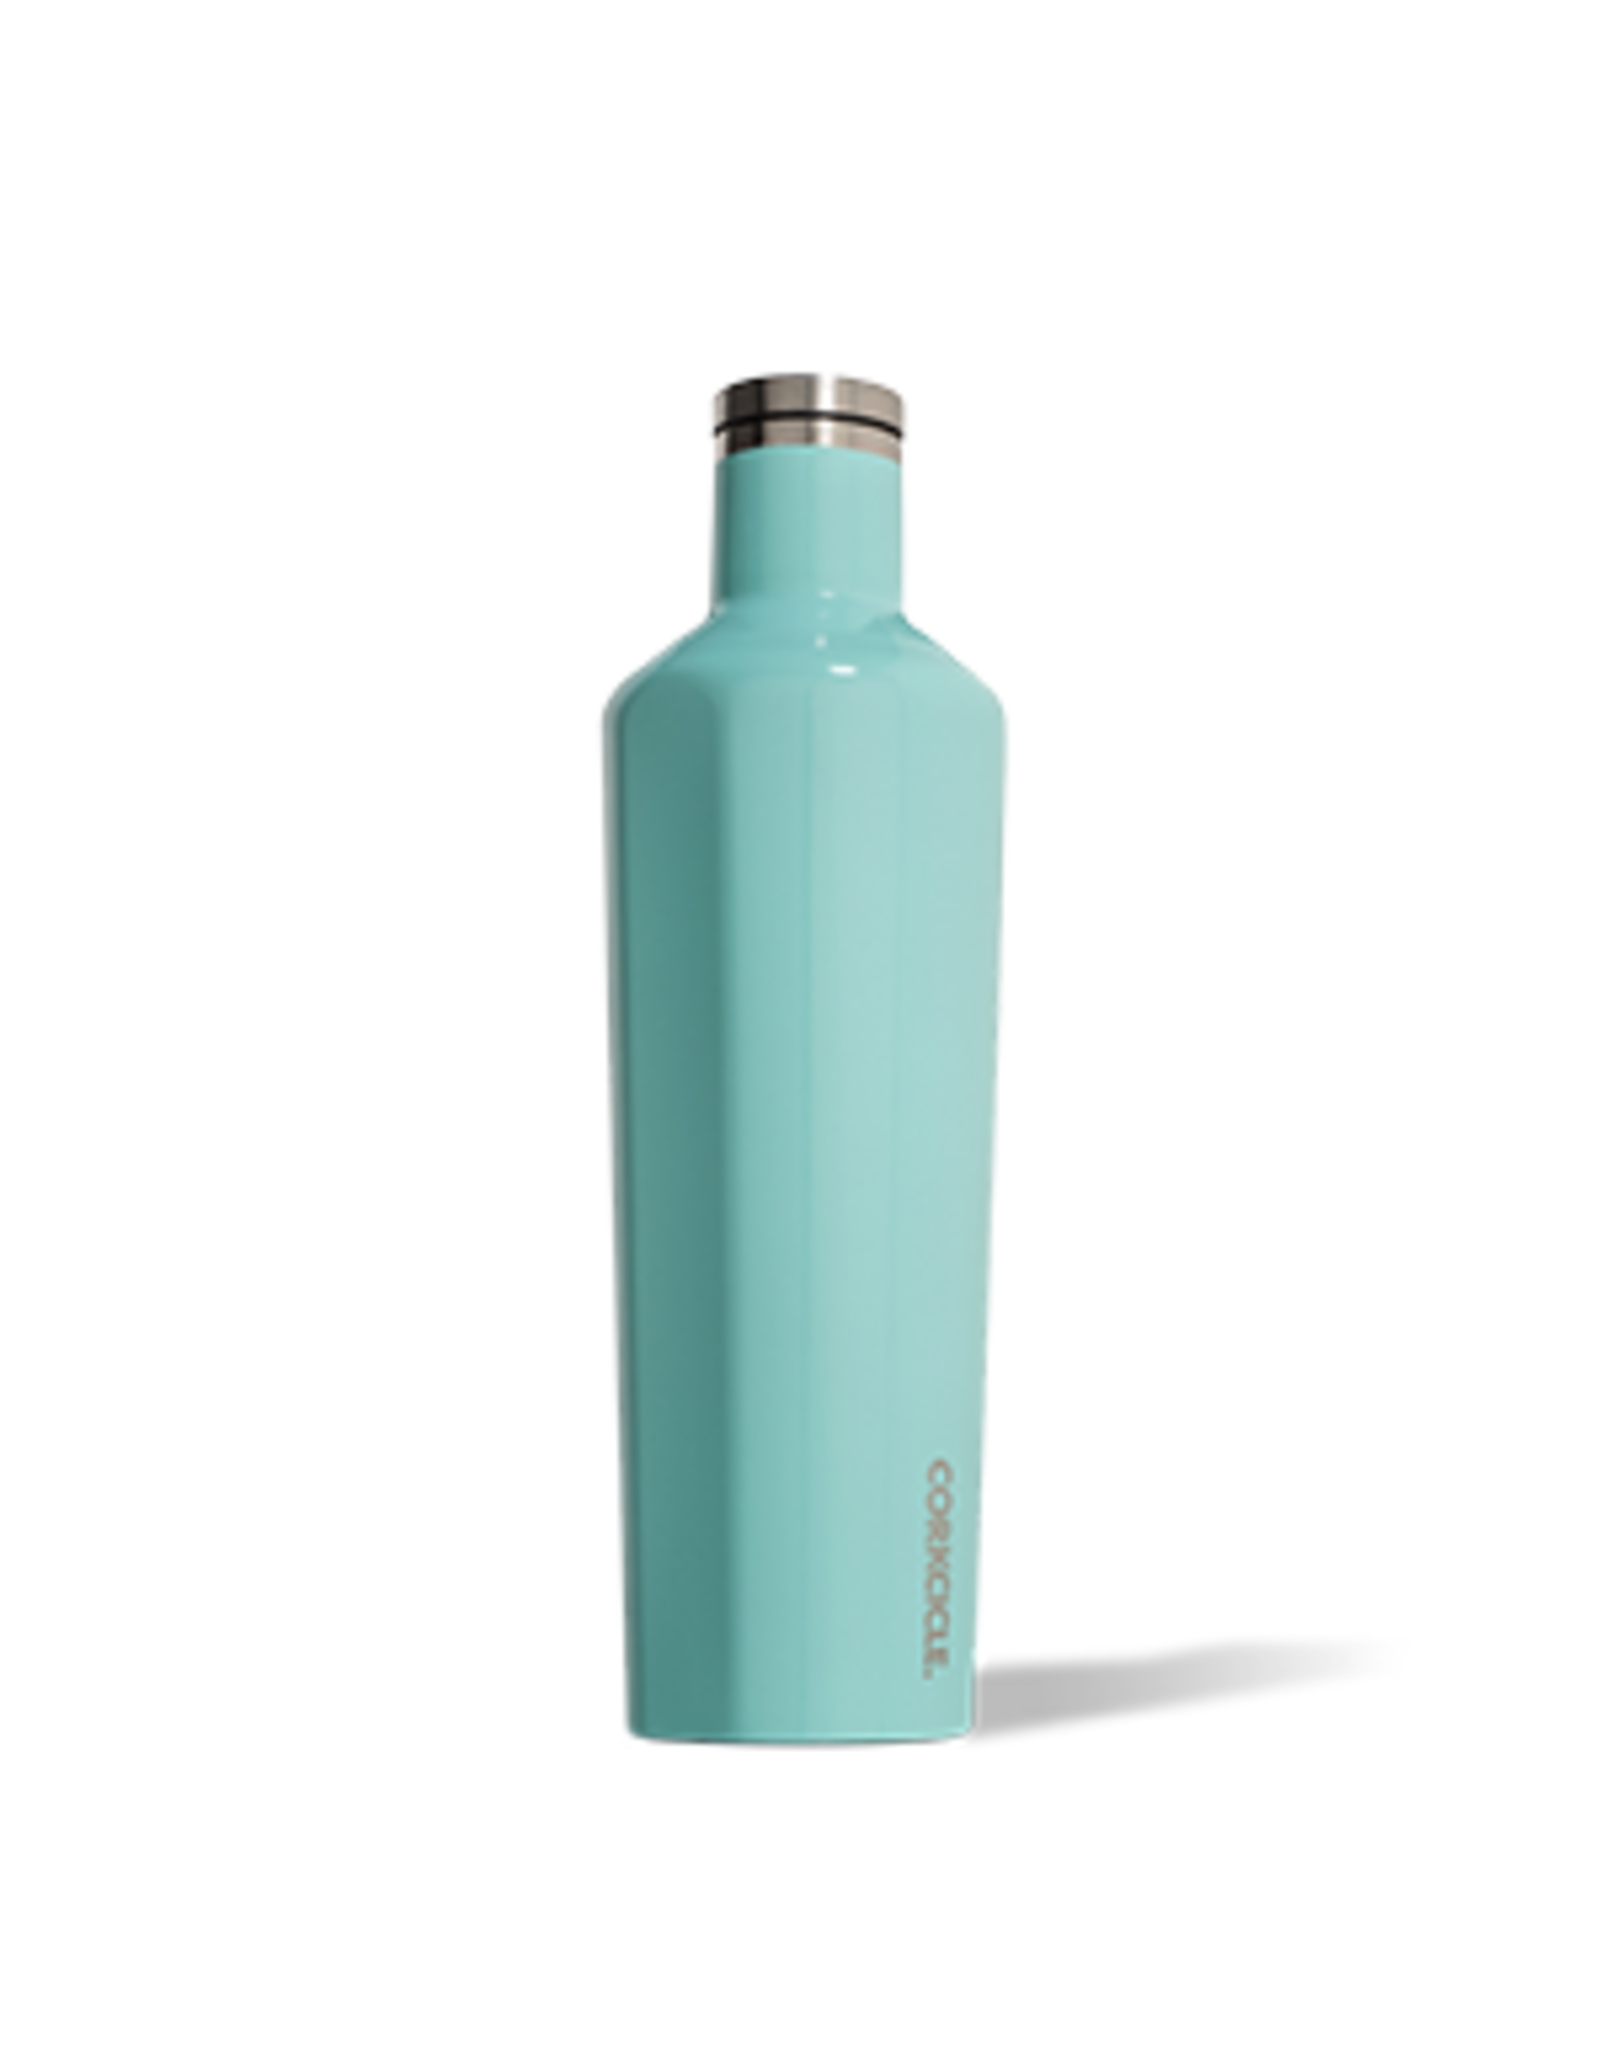 Corkcicle Canteen - 25oz Gloss Turquoise